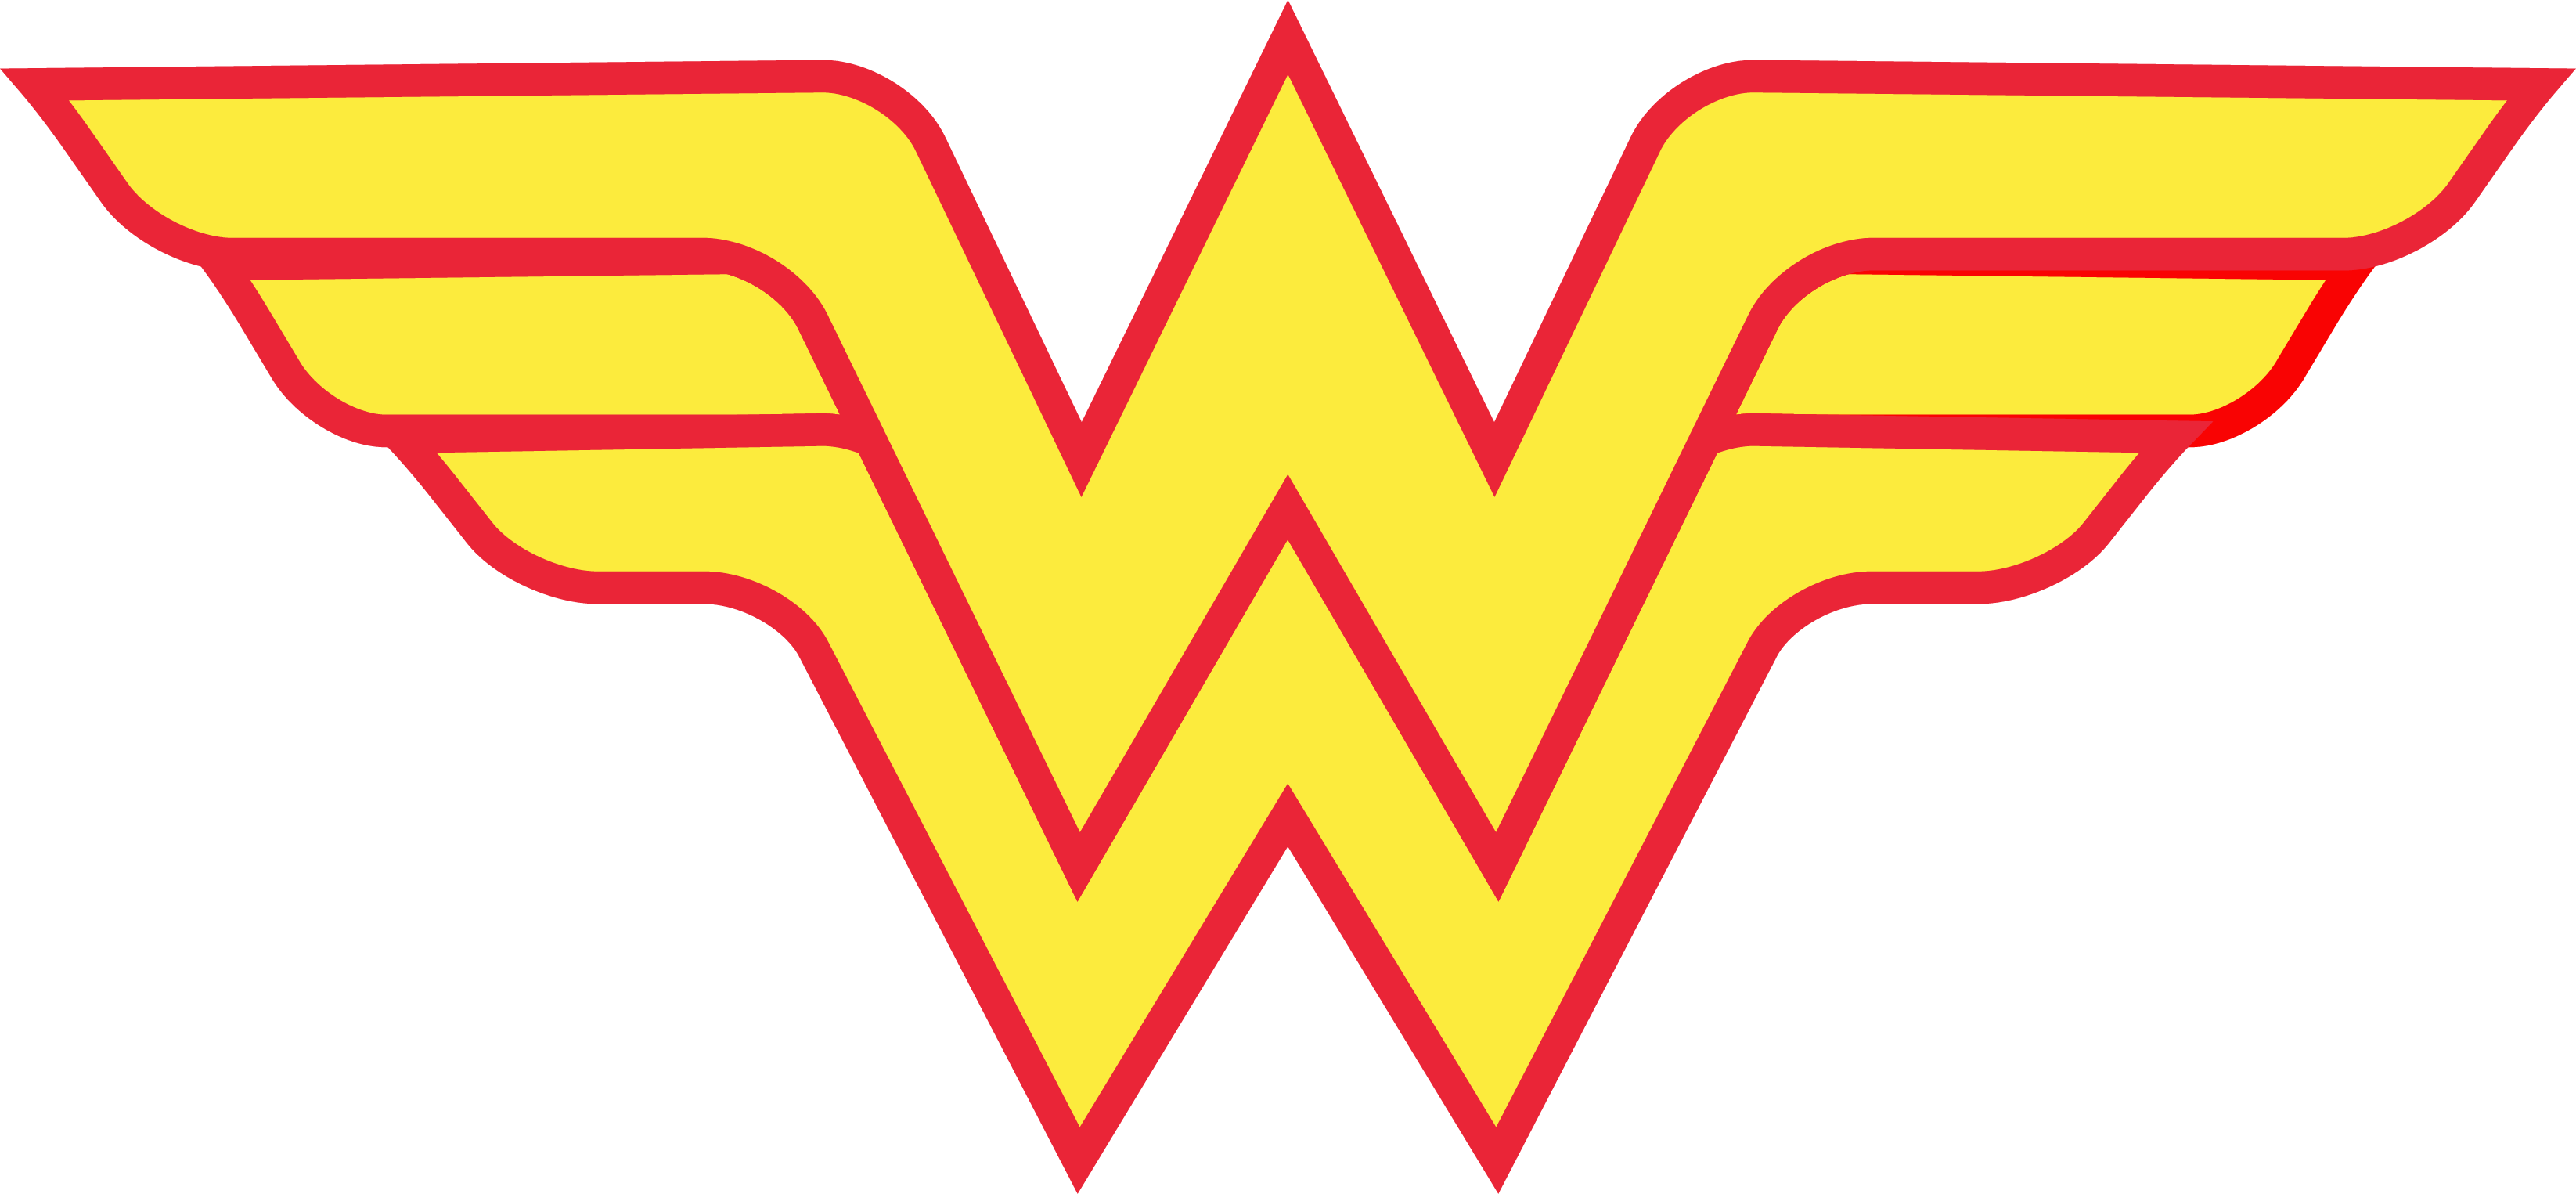 Super Woman Logo - Wonder Woman Logo, Wonder Woman Symbol, Meaning, History and Evolution